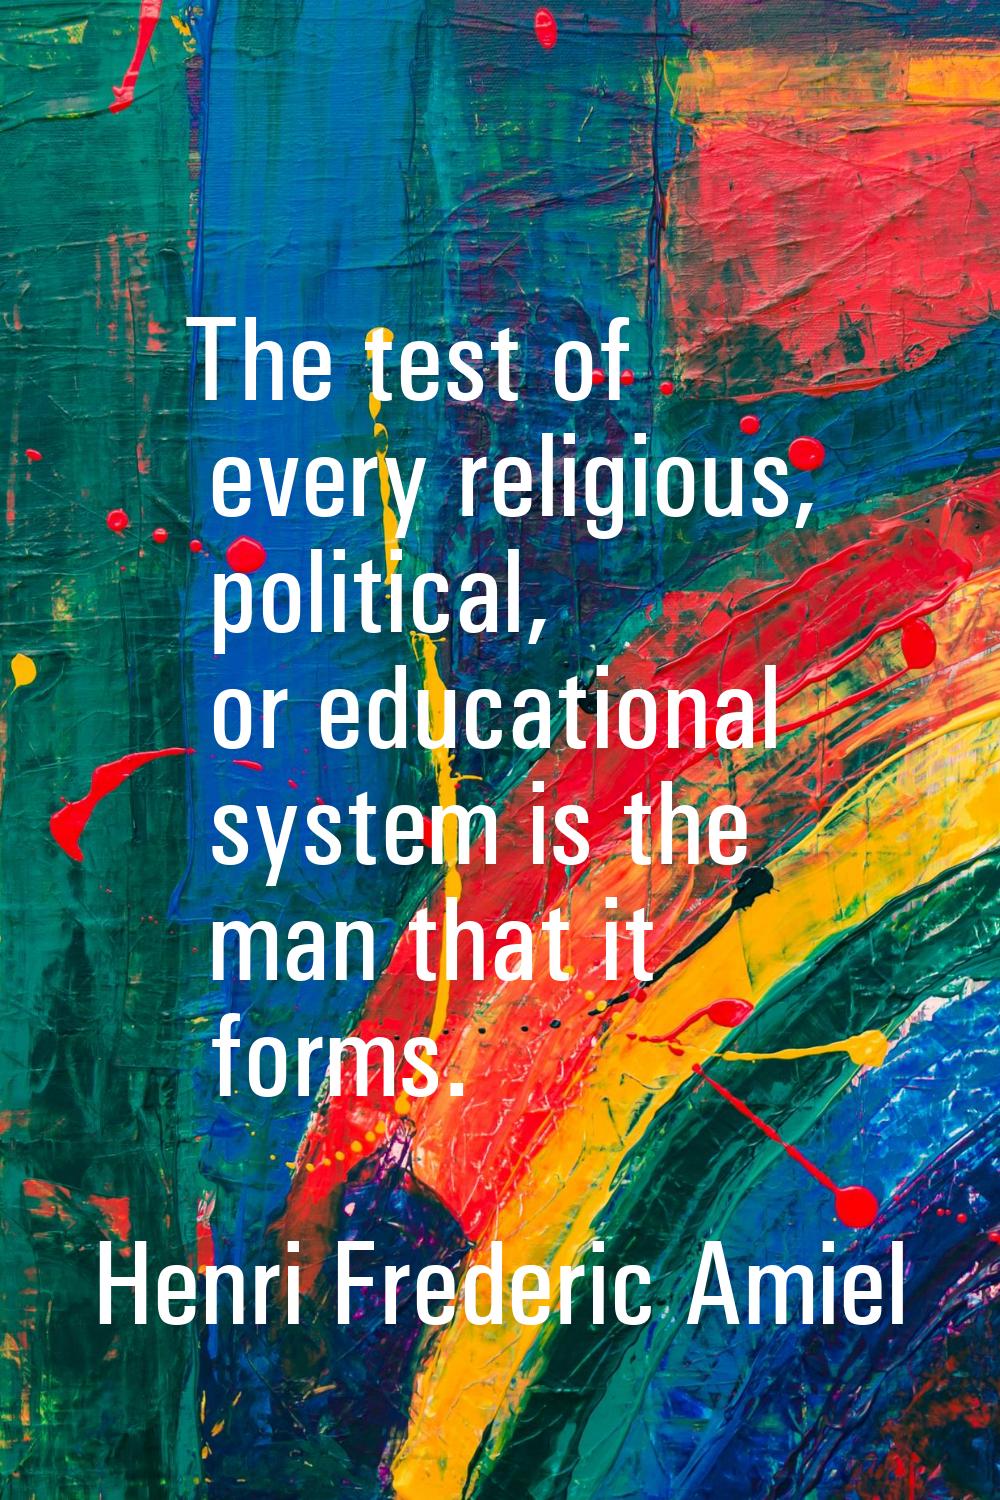 The test of every religious, political, or educational system is the man that it forms.